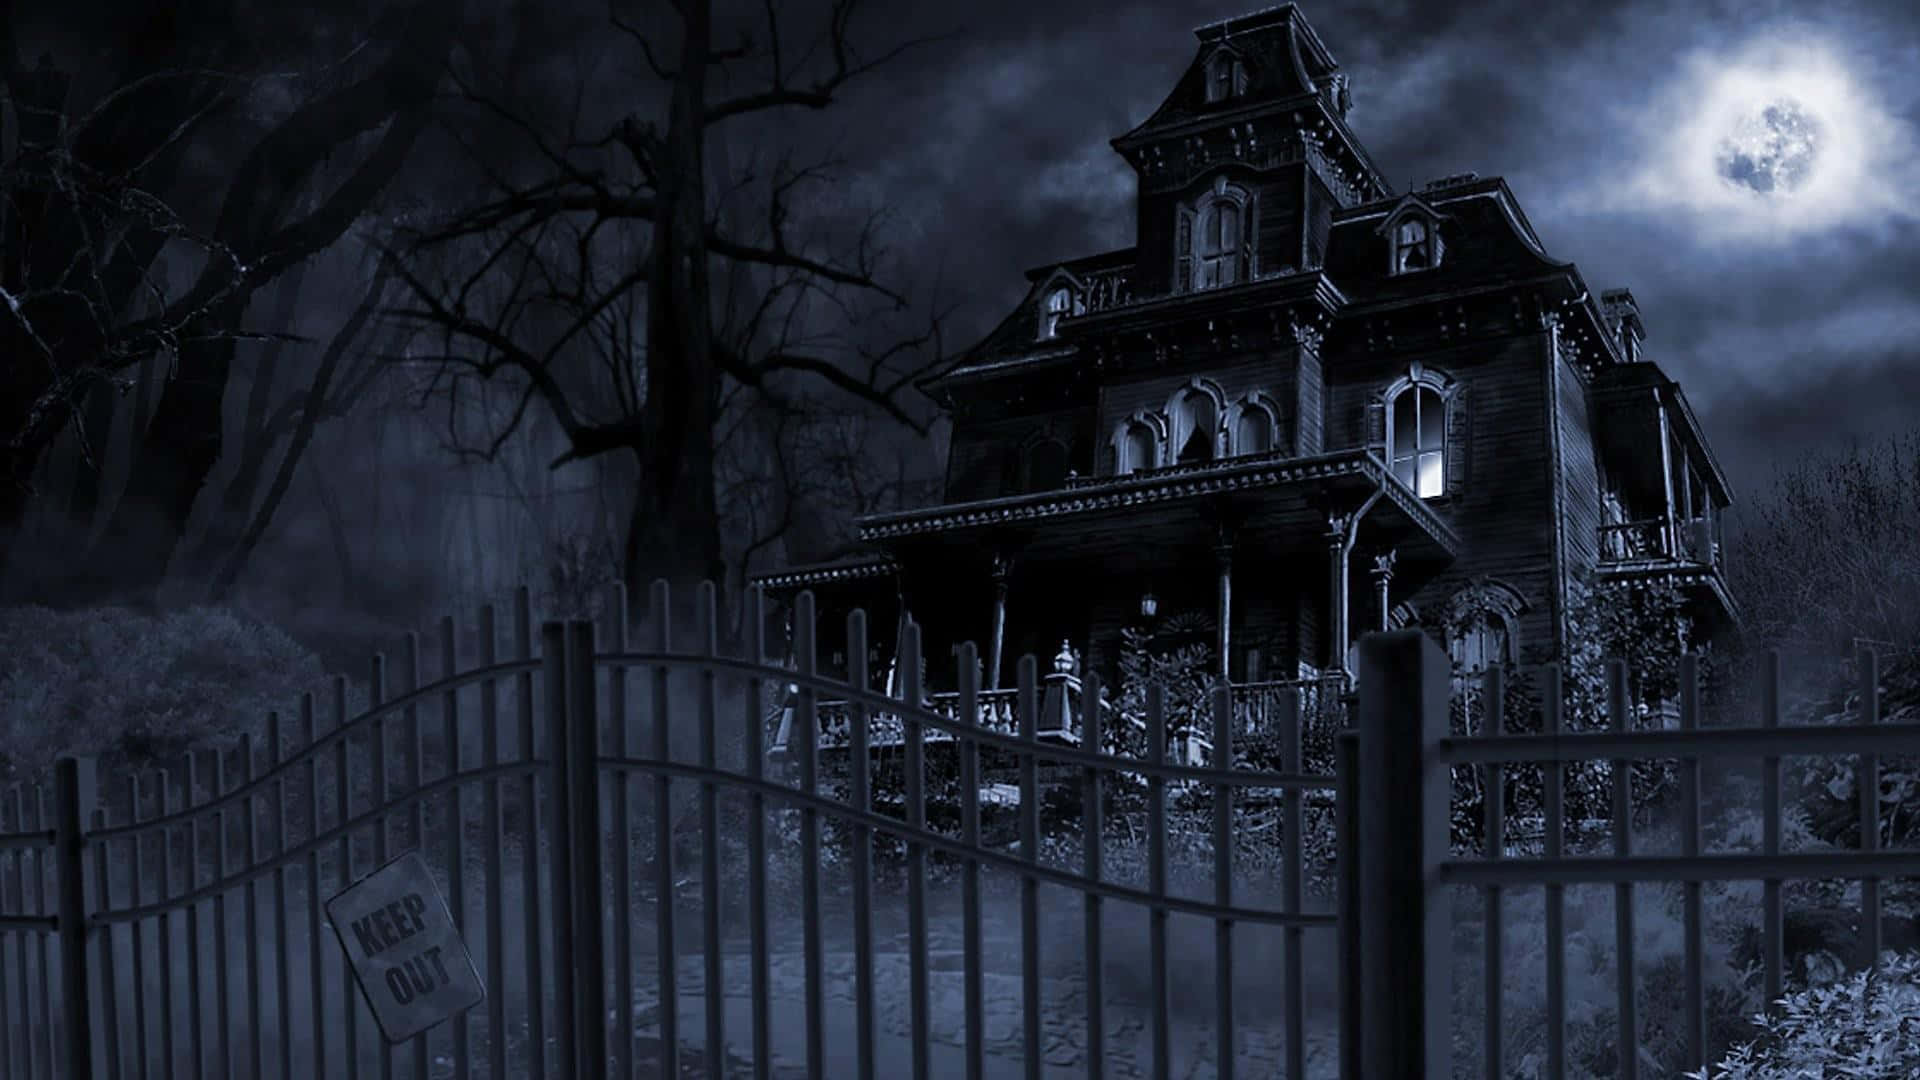 A Scary House With A Gate And A Moon